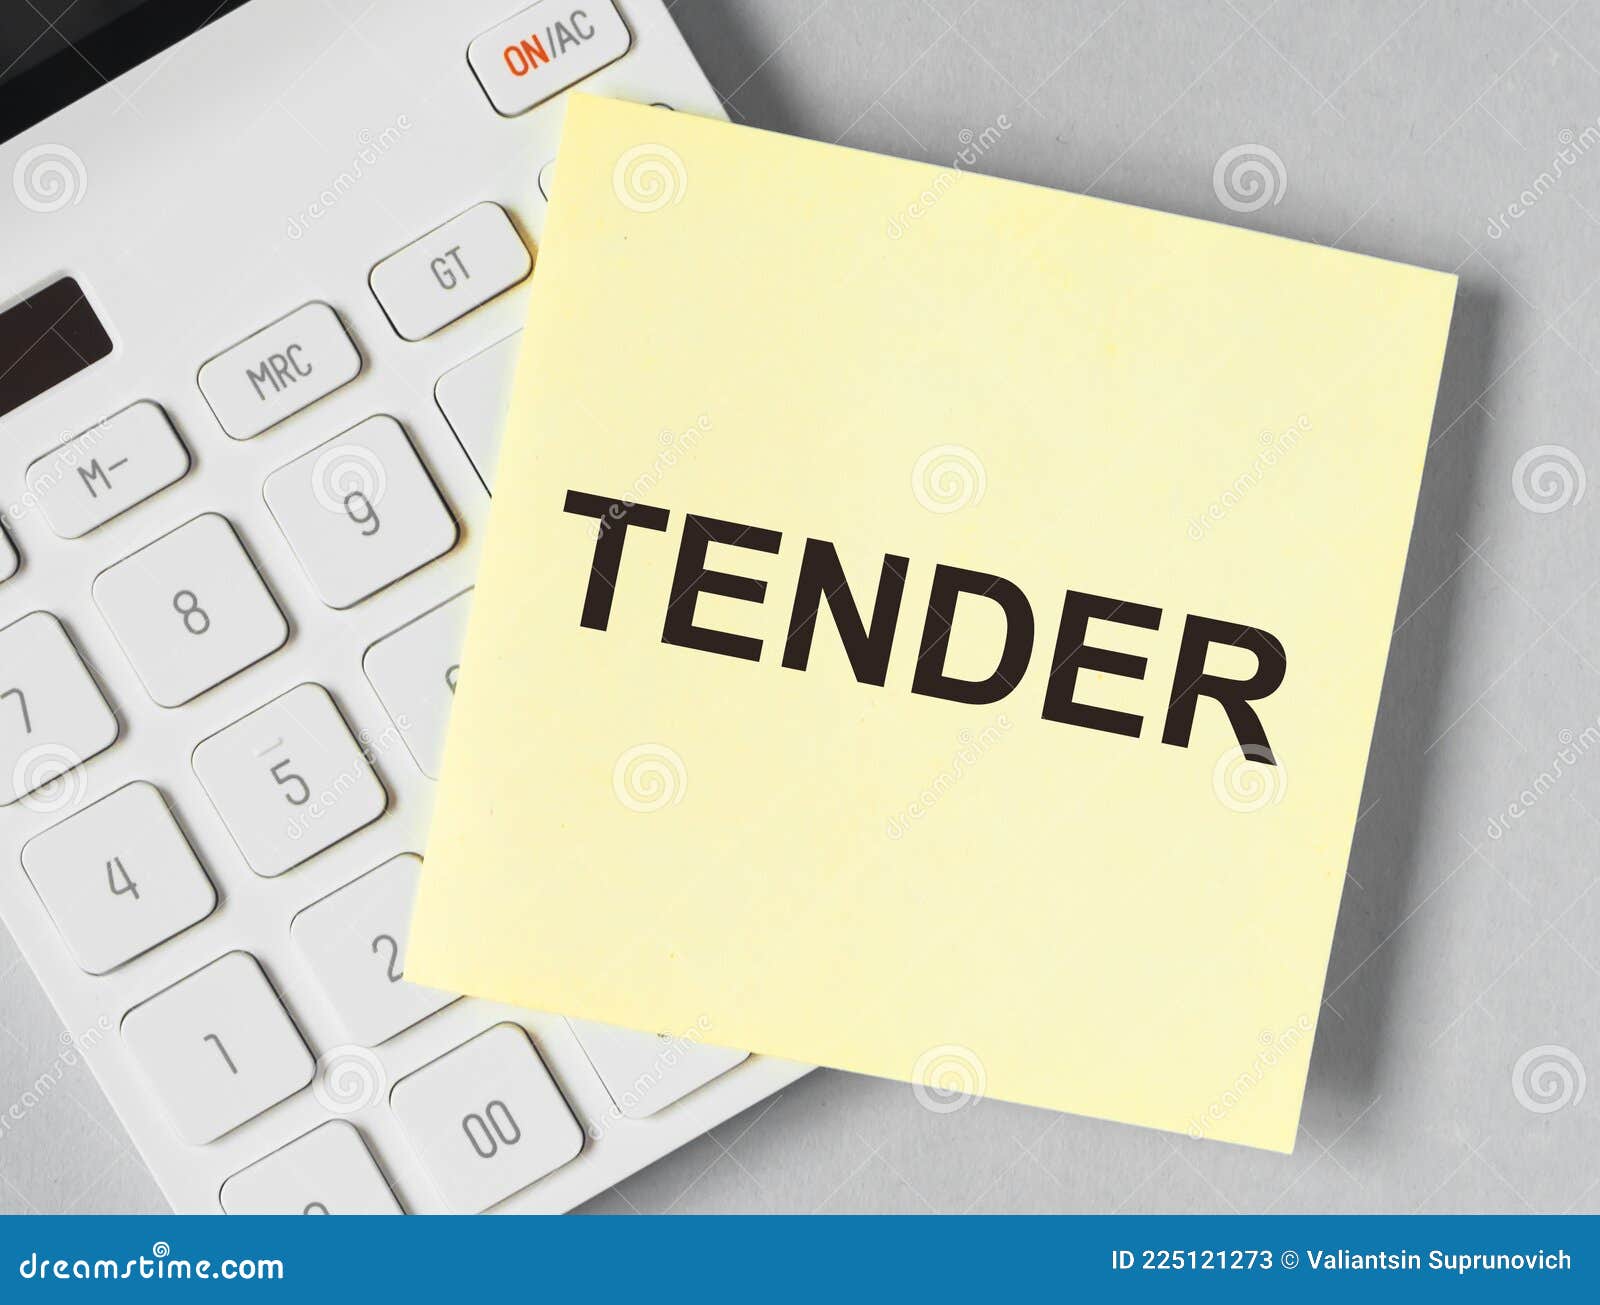 Some People Excel At Public Tenders And Some Don't - Which One Are You?